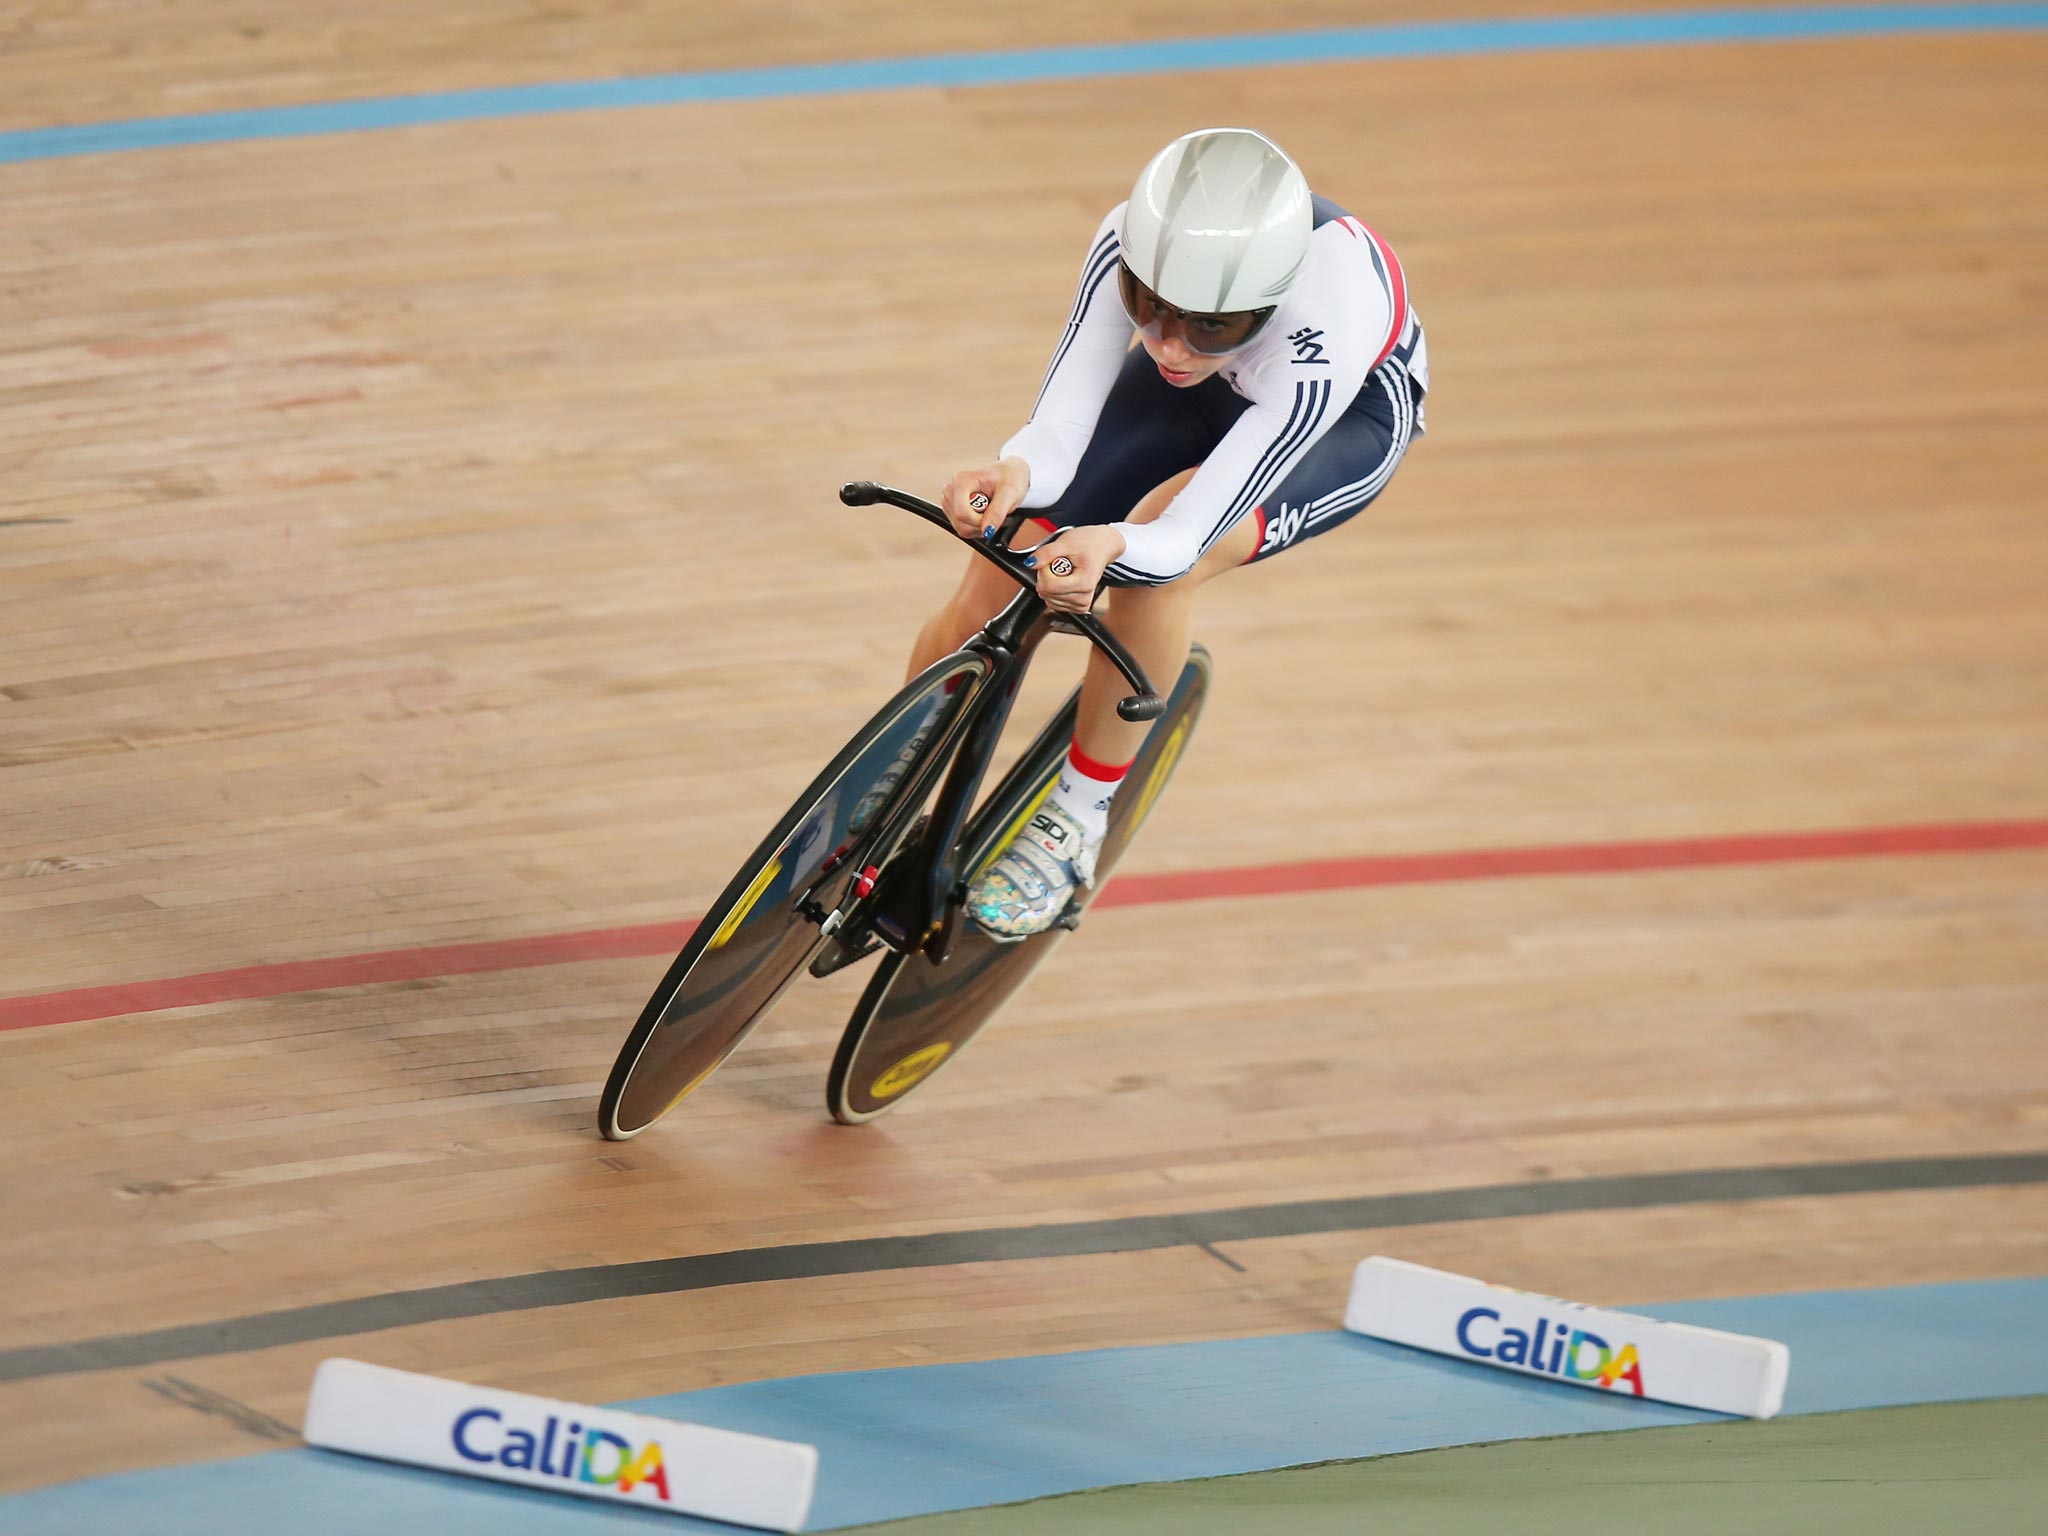 Laura Trott claimed silver in the women's omnium to end Team GB's campaign at the Track Cycling World Championships